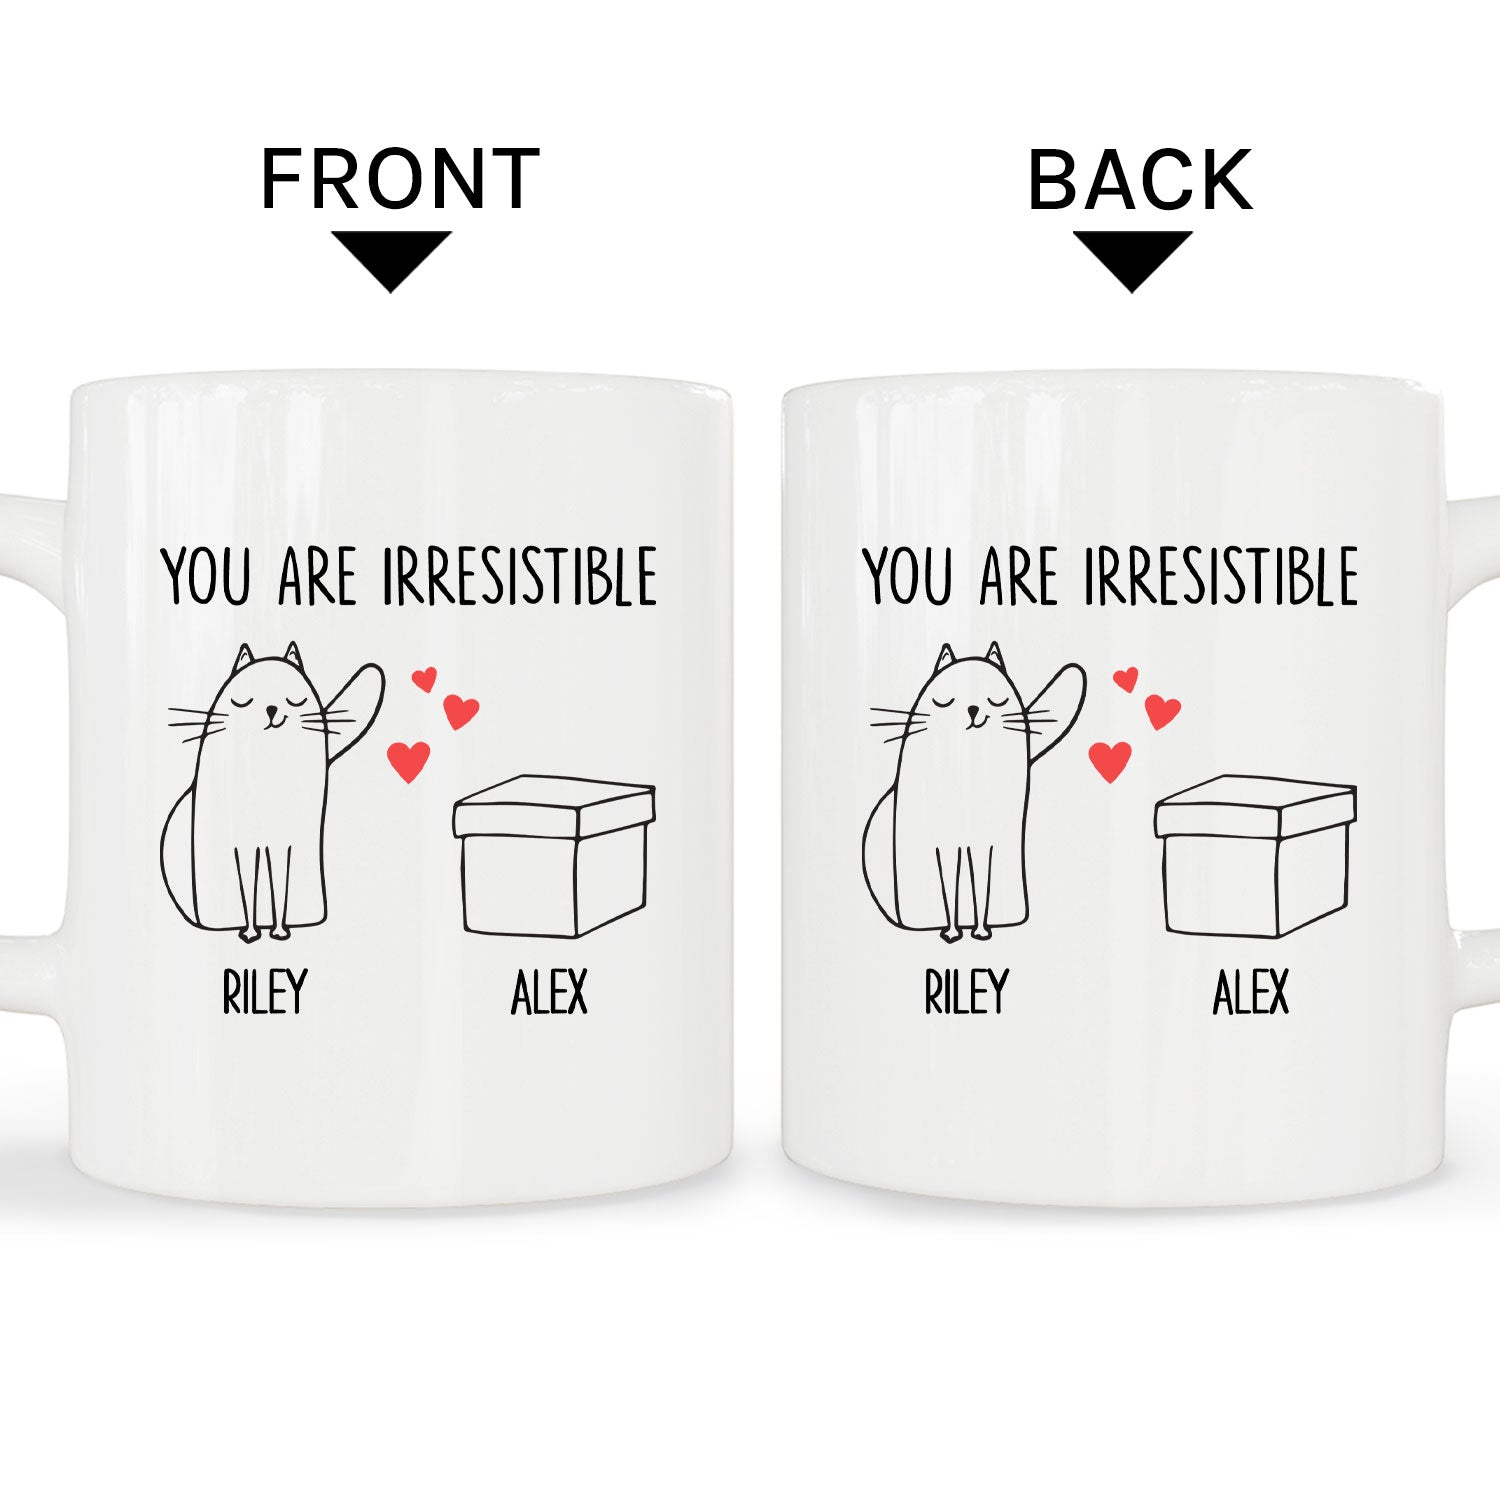 You Are Irresistible - Personalized Anniversary or Valentine's Day gift For Boyfriend or Girlfriend - Custom Mug - MyMindfulGifts